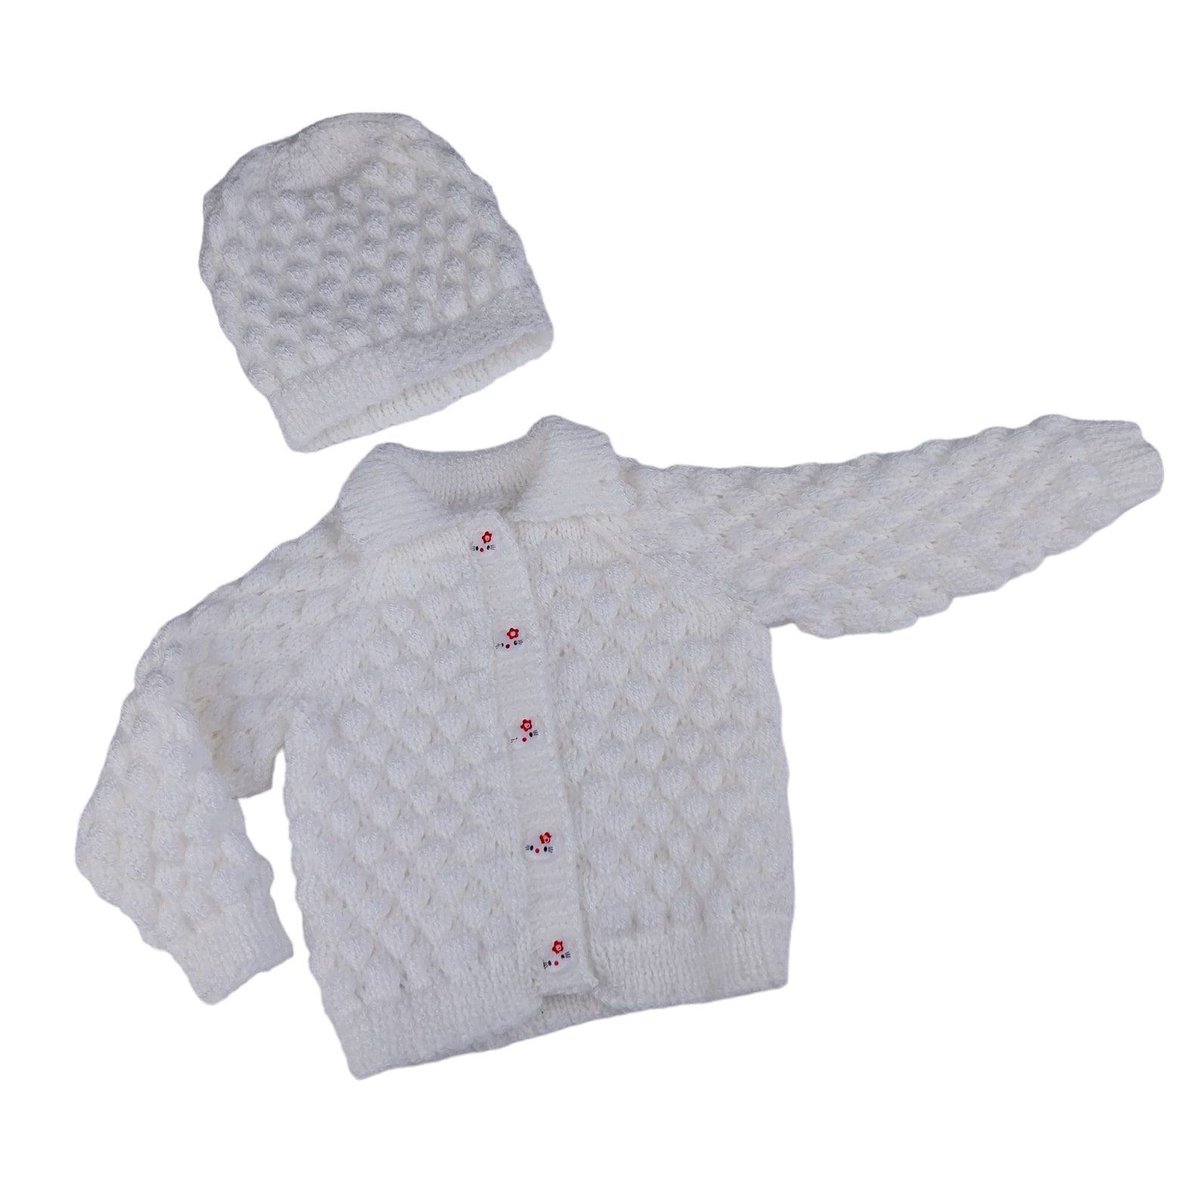 Matching baby cardigan and hat hand knitted in white bubble stitch pattern to fit it 9 - 18 months knittingtopia.etsy.com/listing/168446… #knittingtopia #etsy #handmade #babyshowergifts #craftbizparty #MHHSBD